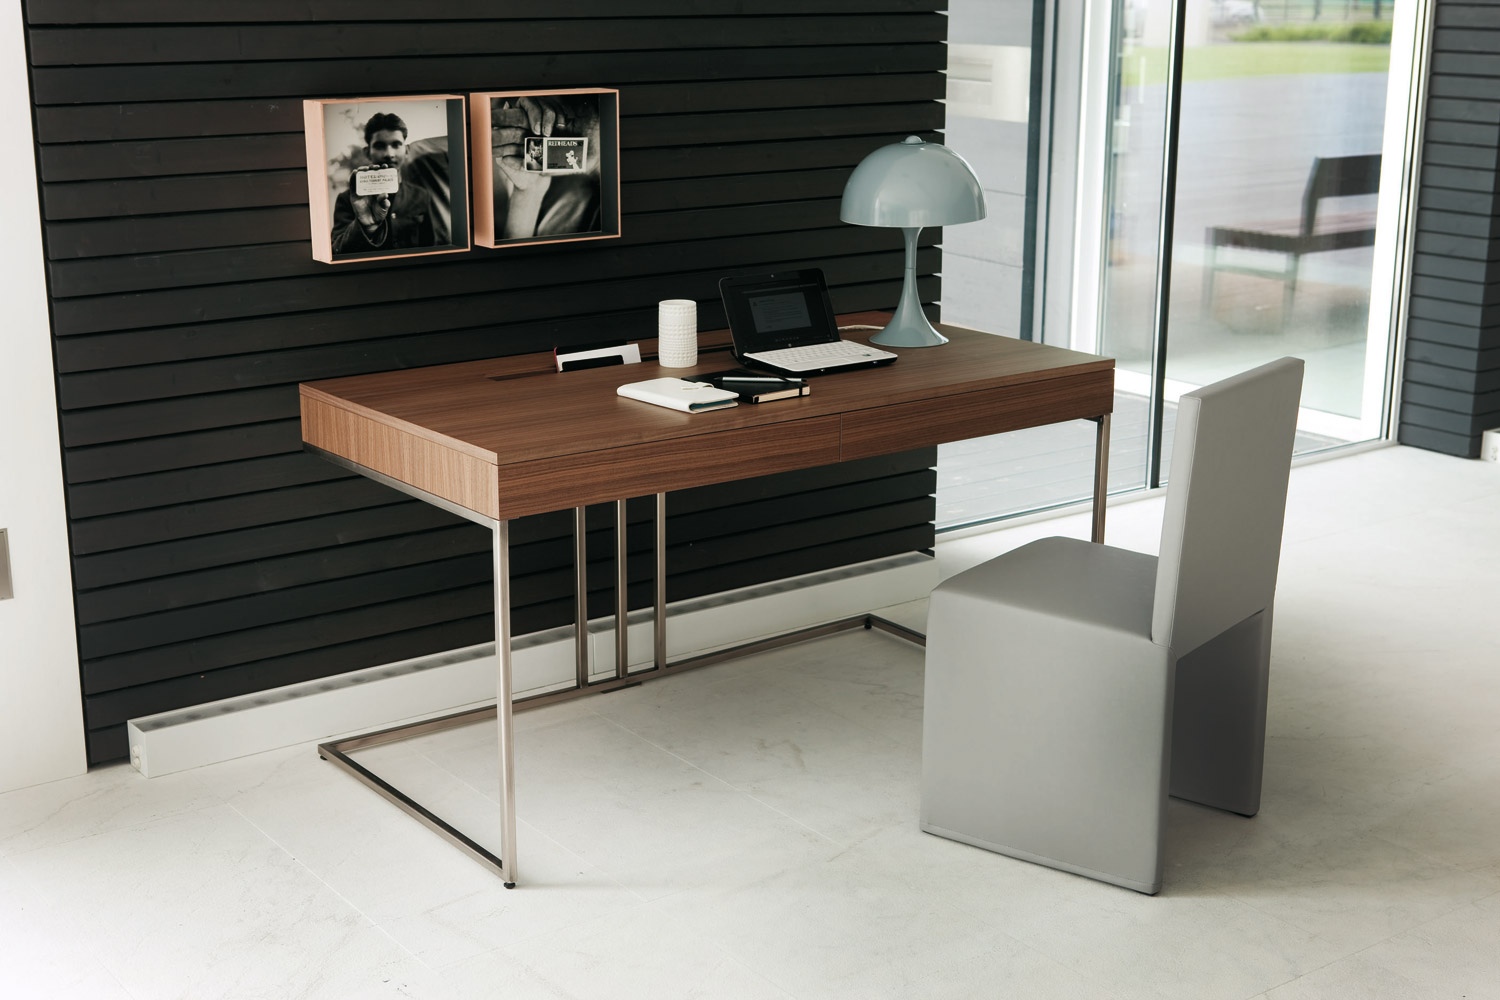 Simple design of the desk "width =" 1500 "height =" 1000 "srcset =" https://mileray.com/wp-content/uploads/2020/05/1588505105_194_Inspirational-Workspace-Design-Makes-Your-Bedroom-Looks-Trendy-and-Awesome.jpeg 1500w, https: // myfashionos .com / wp-content / uploads / 2016/02 / 17-Contemporary-desktop-300x200.jpeg 300w, https://mileray.com/wp-content/uploads/2016/02/17-Contemporary-desk-768x512. jpeg 768w, https://mileray.com/wp-content/uploads/2016/02/17-Contemporary-desk-1024x683.jpeg 1024w, https://mileray.com/wp-content/uploads/2016/02/ 17-Contemporary-Desk-696x464.jpeg 696w, https://mileray.com/wp-content/uploads/2016/02/17-Contemporary-desk-1068x712.jpeg 1068w, https://mileray.com/wp- Content / Uploads / 2016/02 / 17-Contemporary-Desk-630x420.jpeg 630w "Sizes =" (maximum width: 1500px) 100vw, 1500px